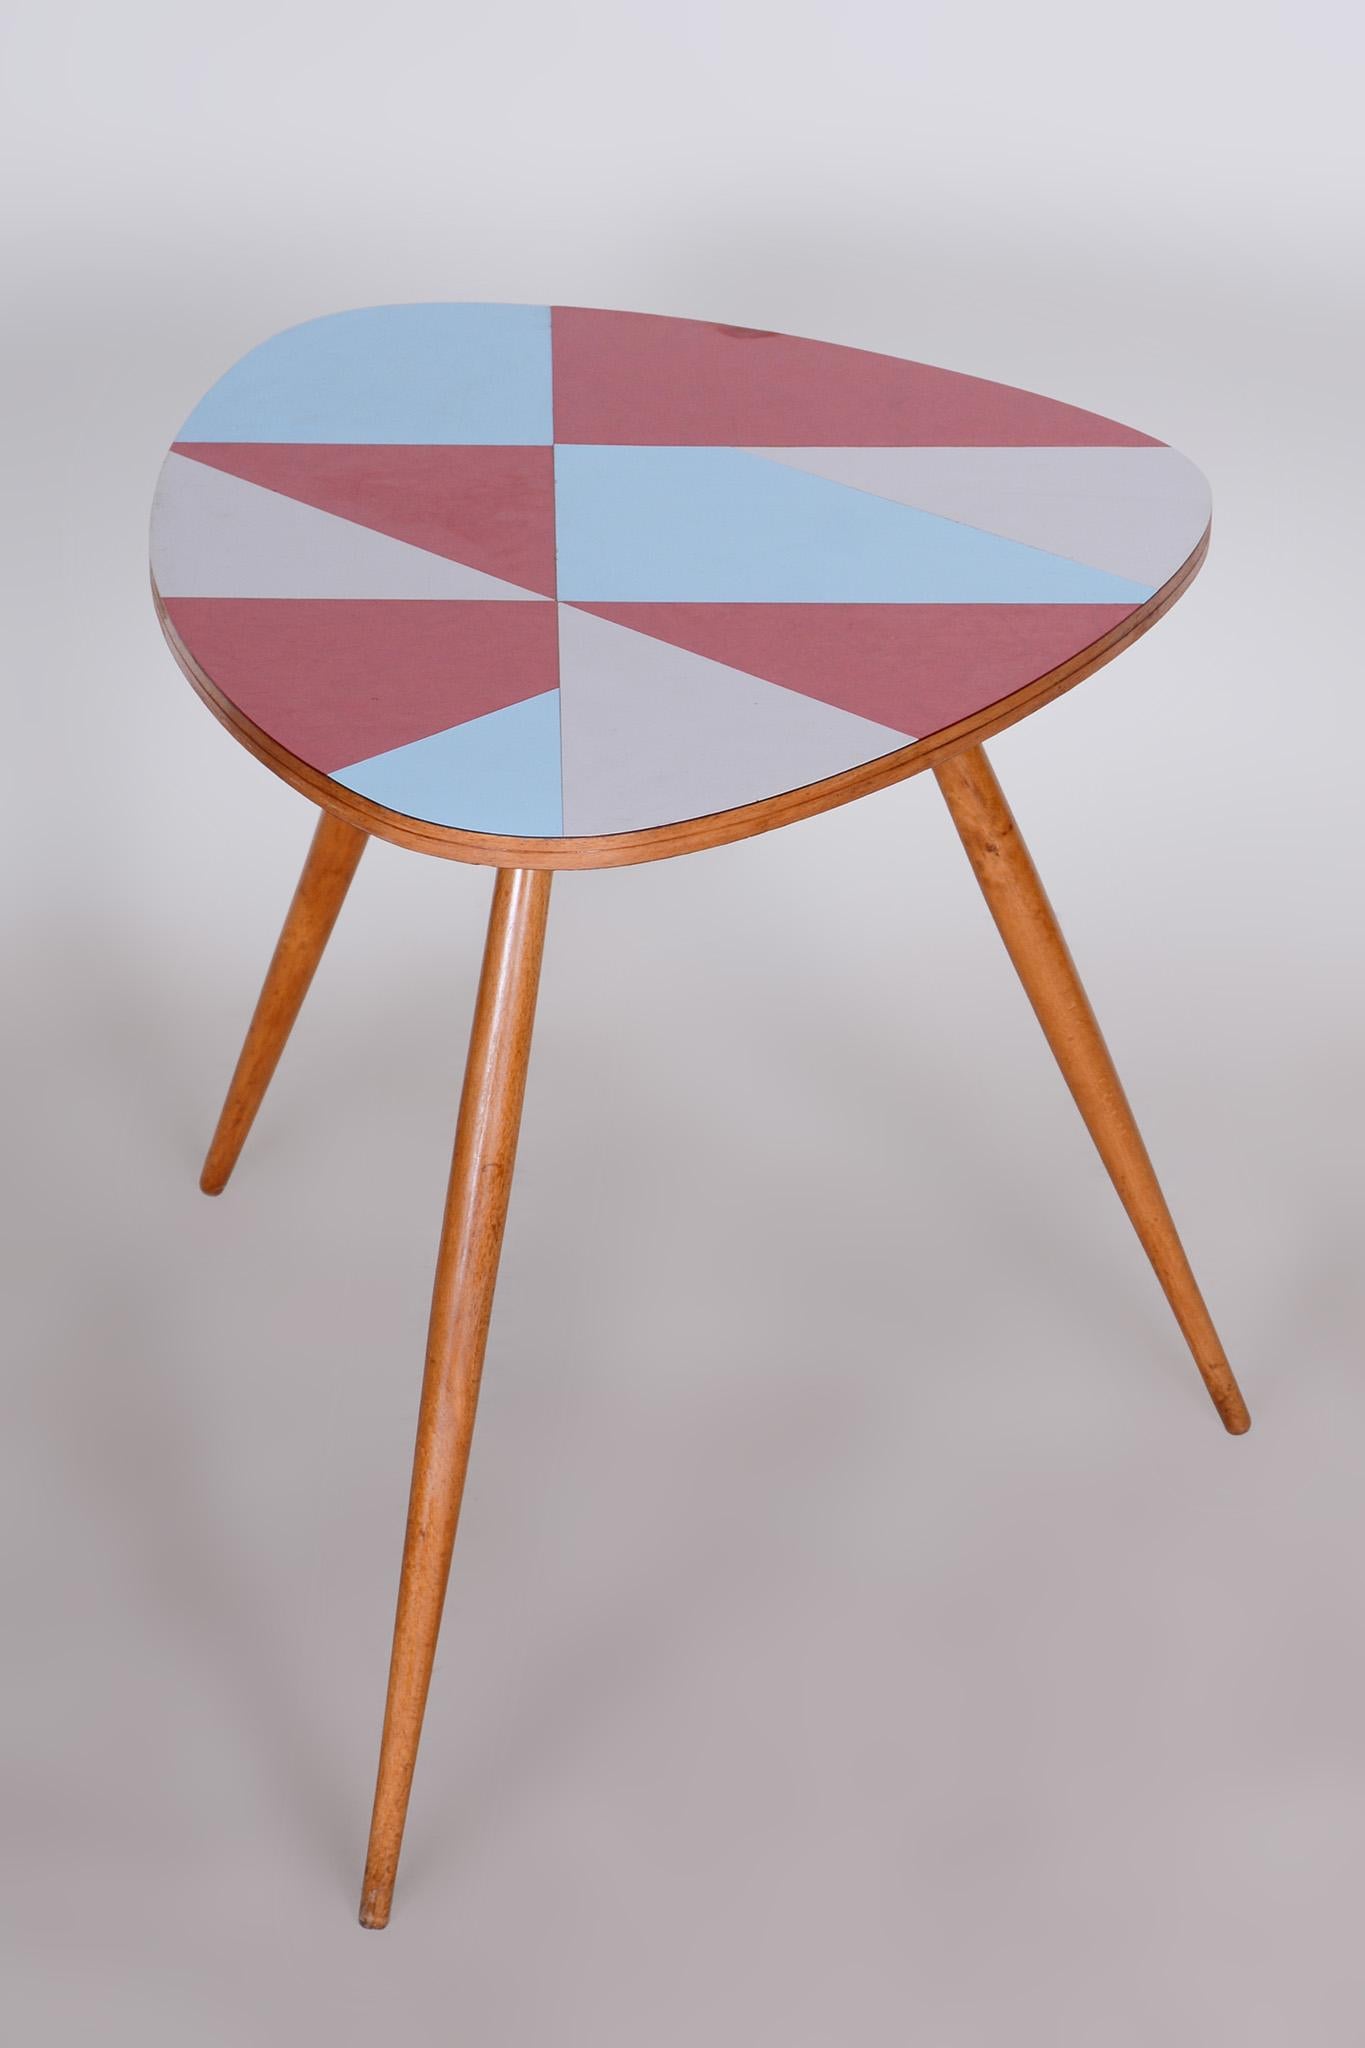 Mid-20th Century Small Restored Midcentury Table, Beech and Umakart, Czechia, 1950s For Sale